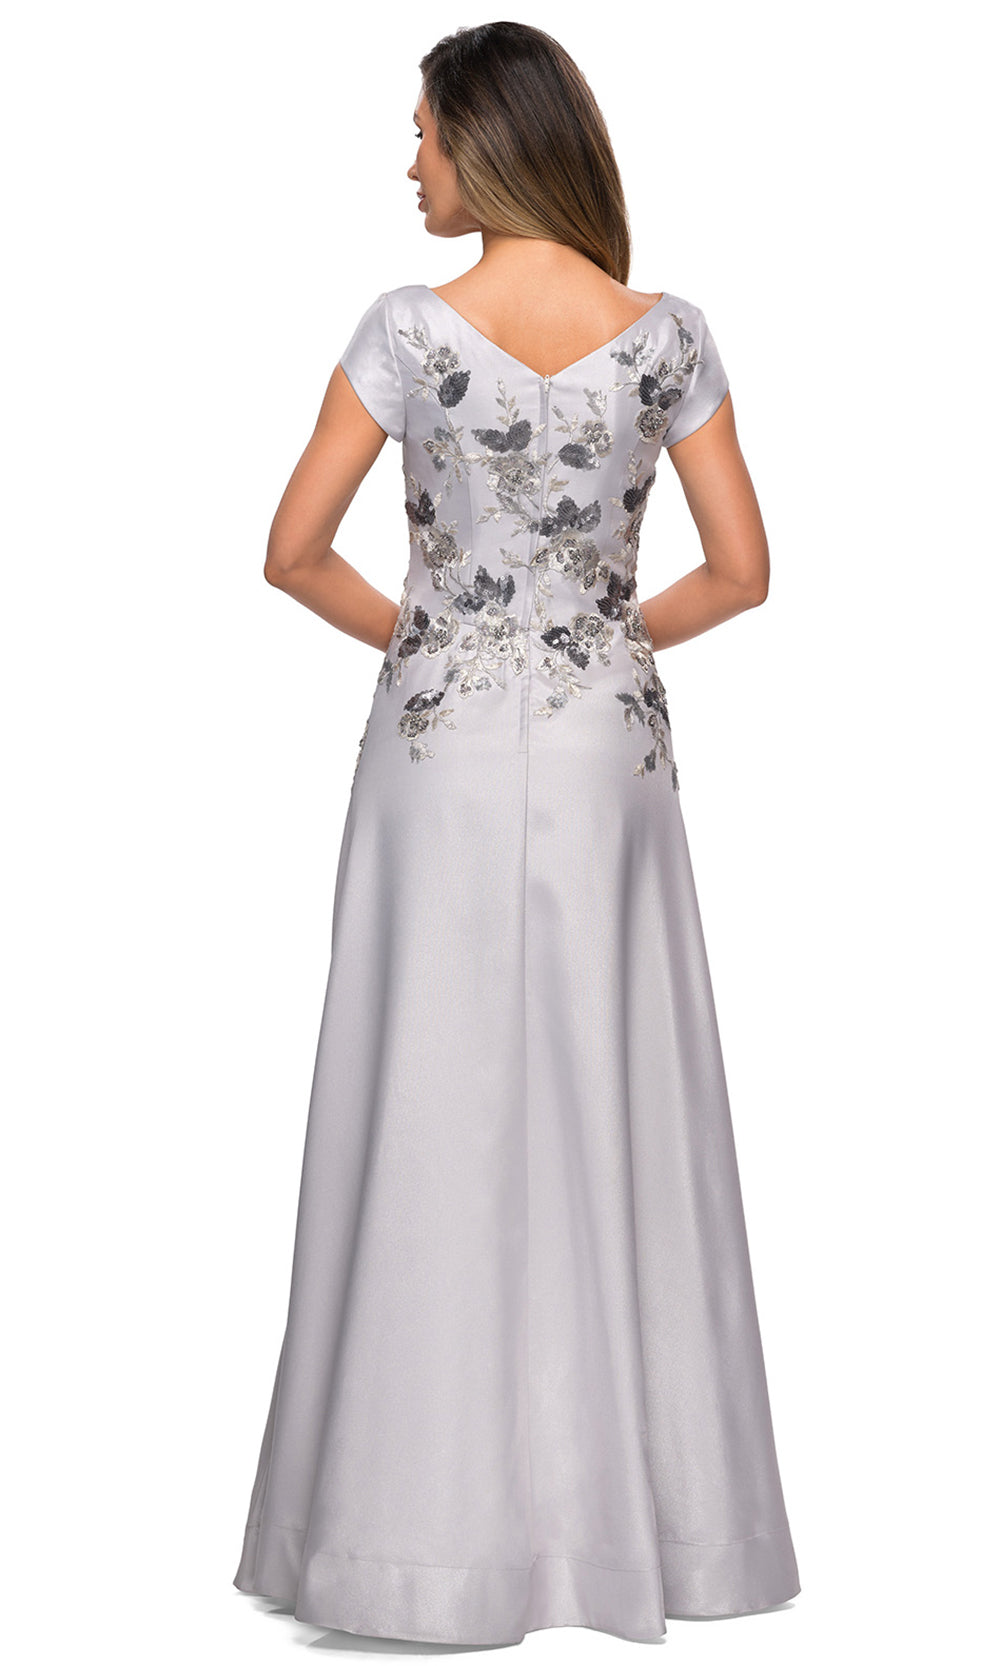 La Femme - 28105 Floral V Neck A-Line Long Dress In Silver and Gray